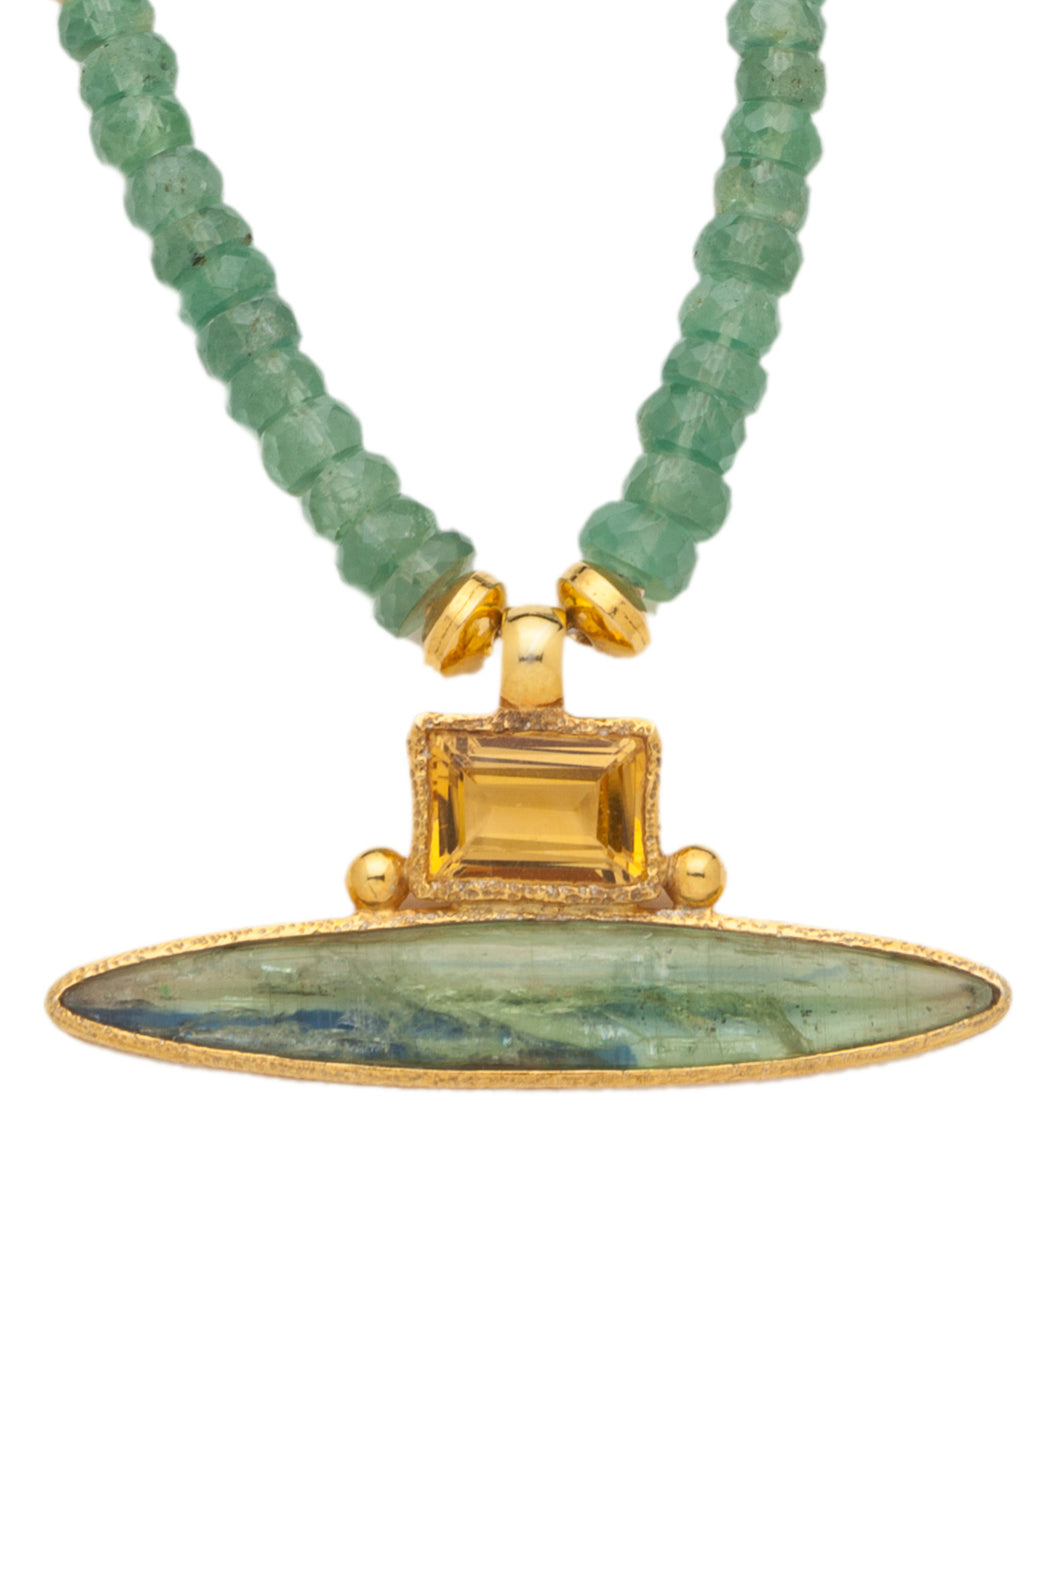 ONE OF A KIND Green Kyanite Necklace with Citrine and Green Kyanite Pendant set in 24kt gold vermeil NF280